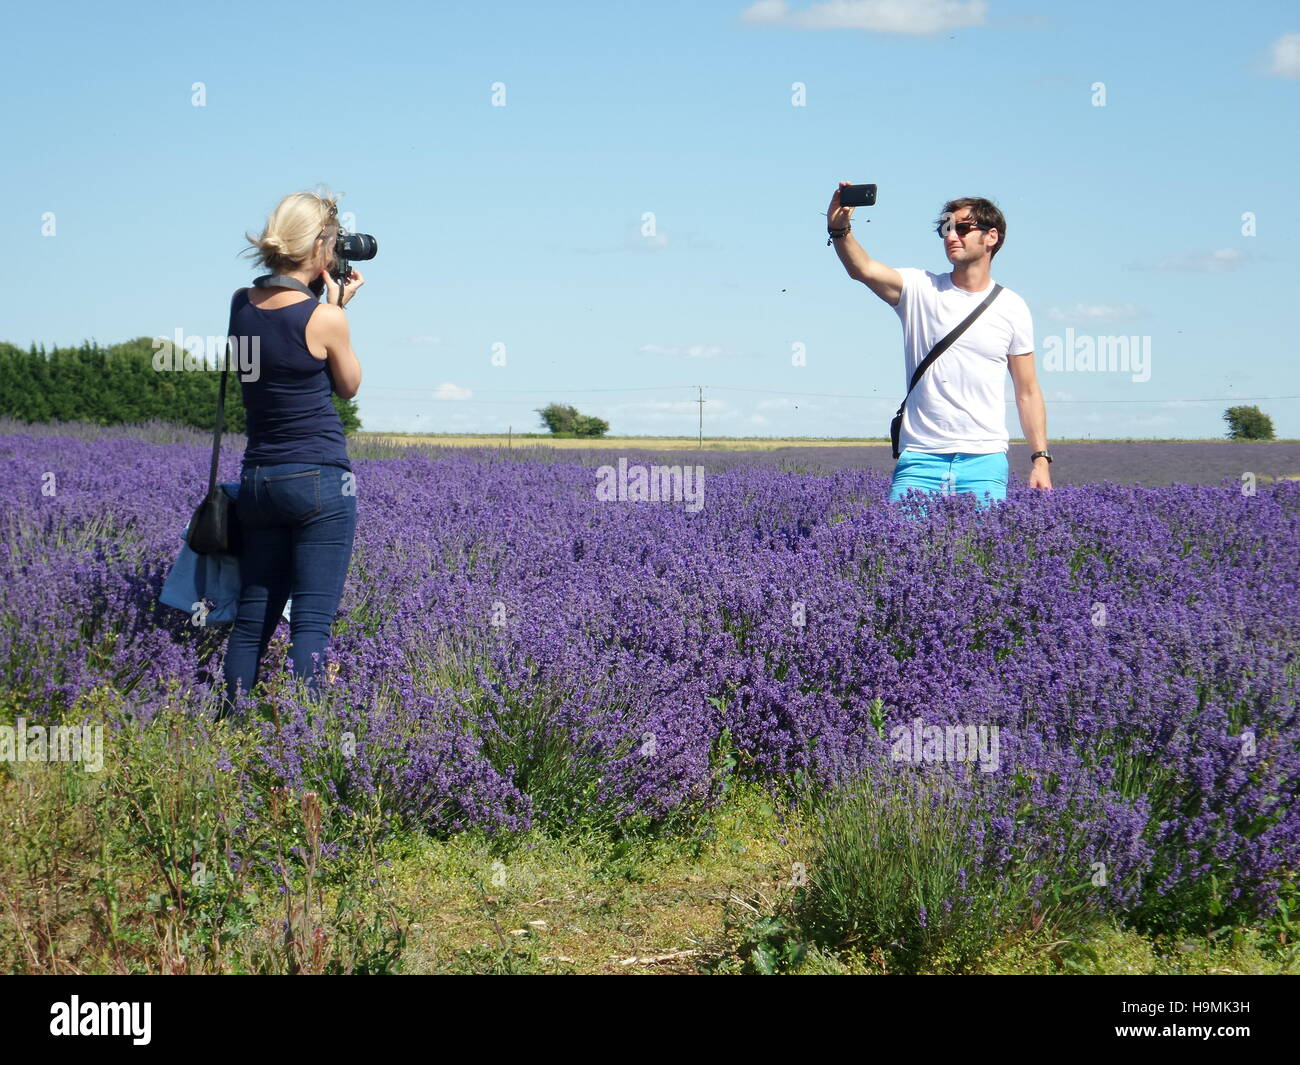 lavender, snowshill, farm, fields, cotswolds, england, gloucestershire, landscape, farming, outdoors, agriculture, scenic, Stock Photo